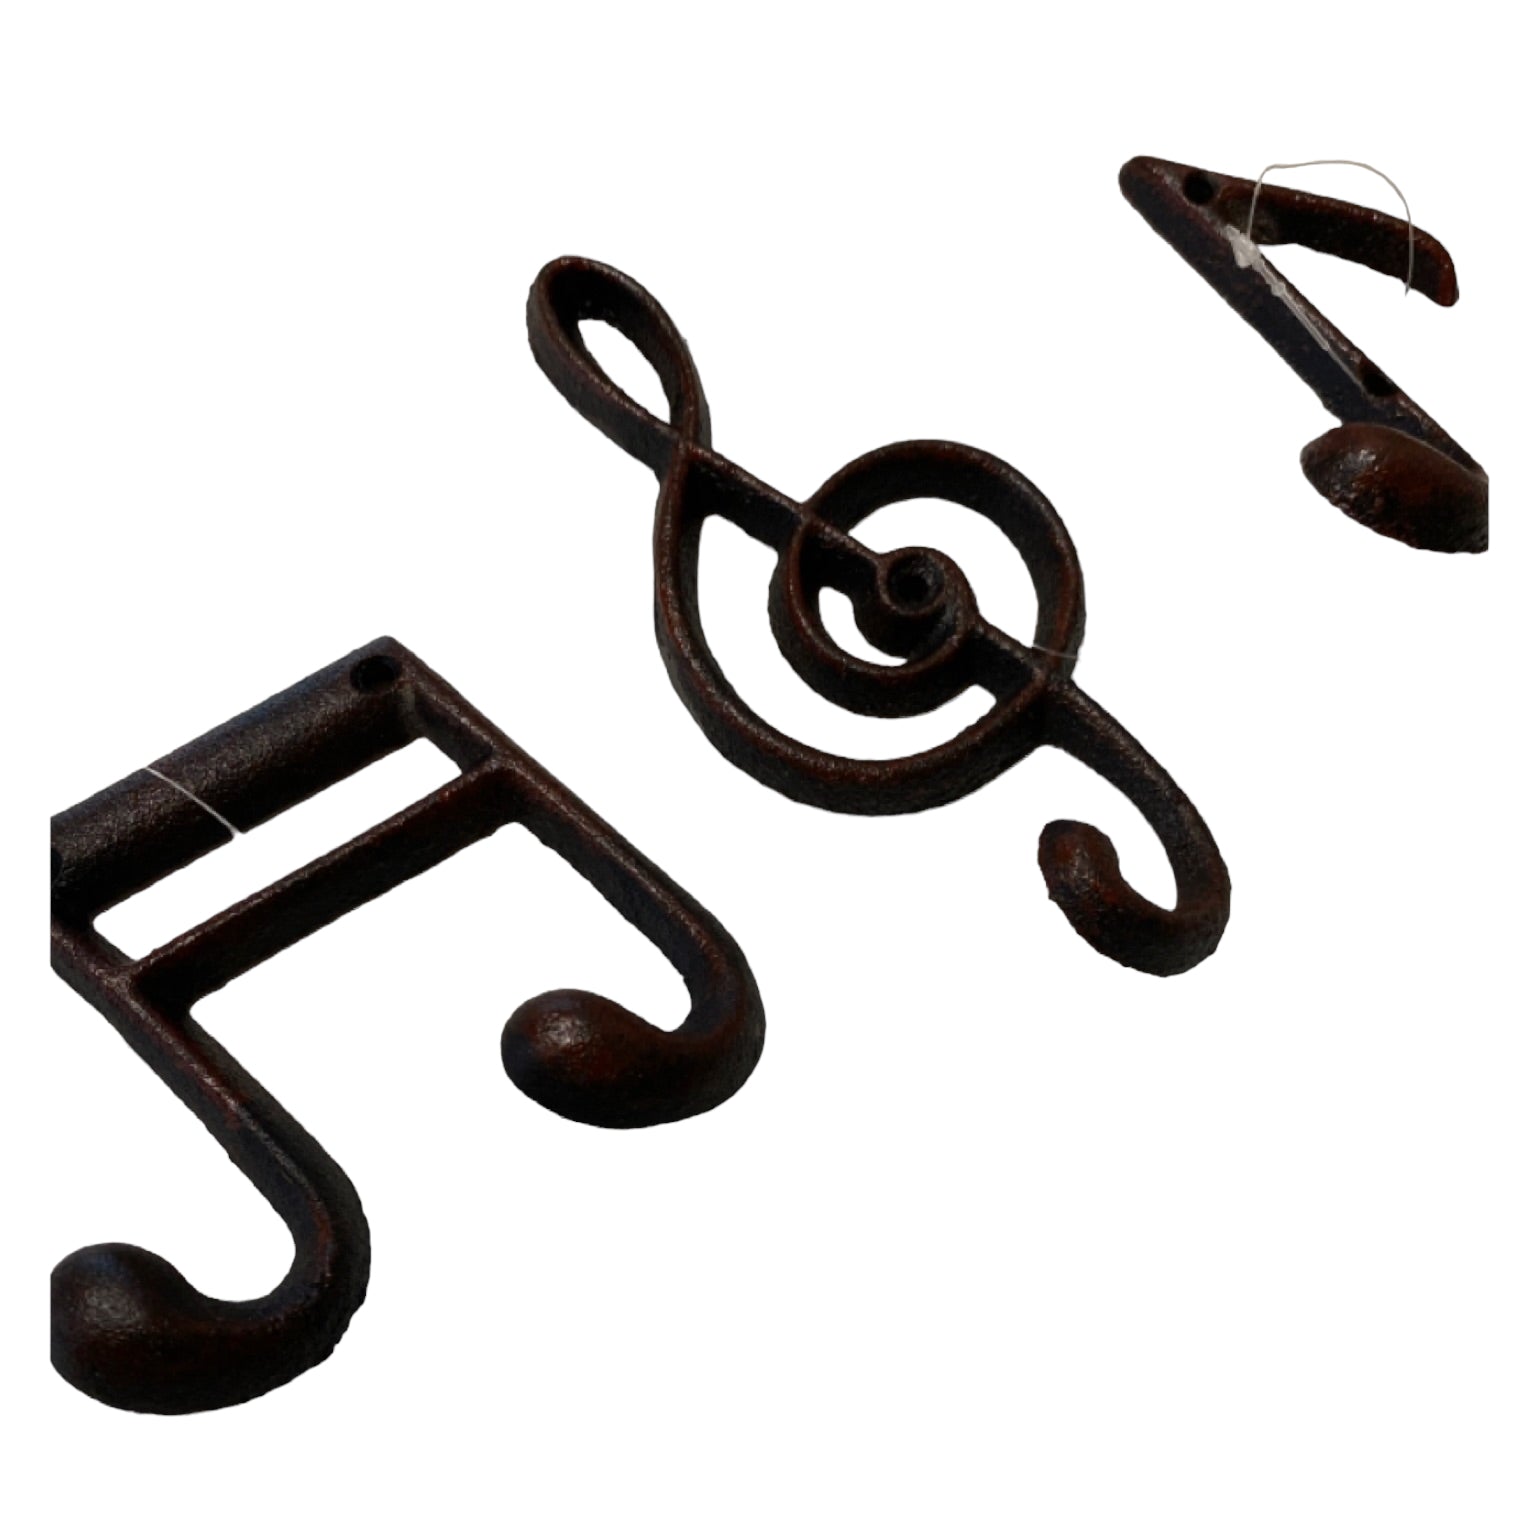 Hook Musical Music Notes Set of 3 Rustic Iron - The Renmy Store Homewares & Gifts 